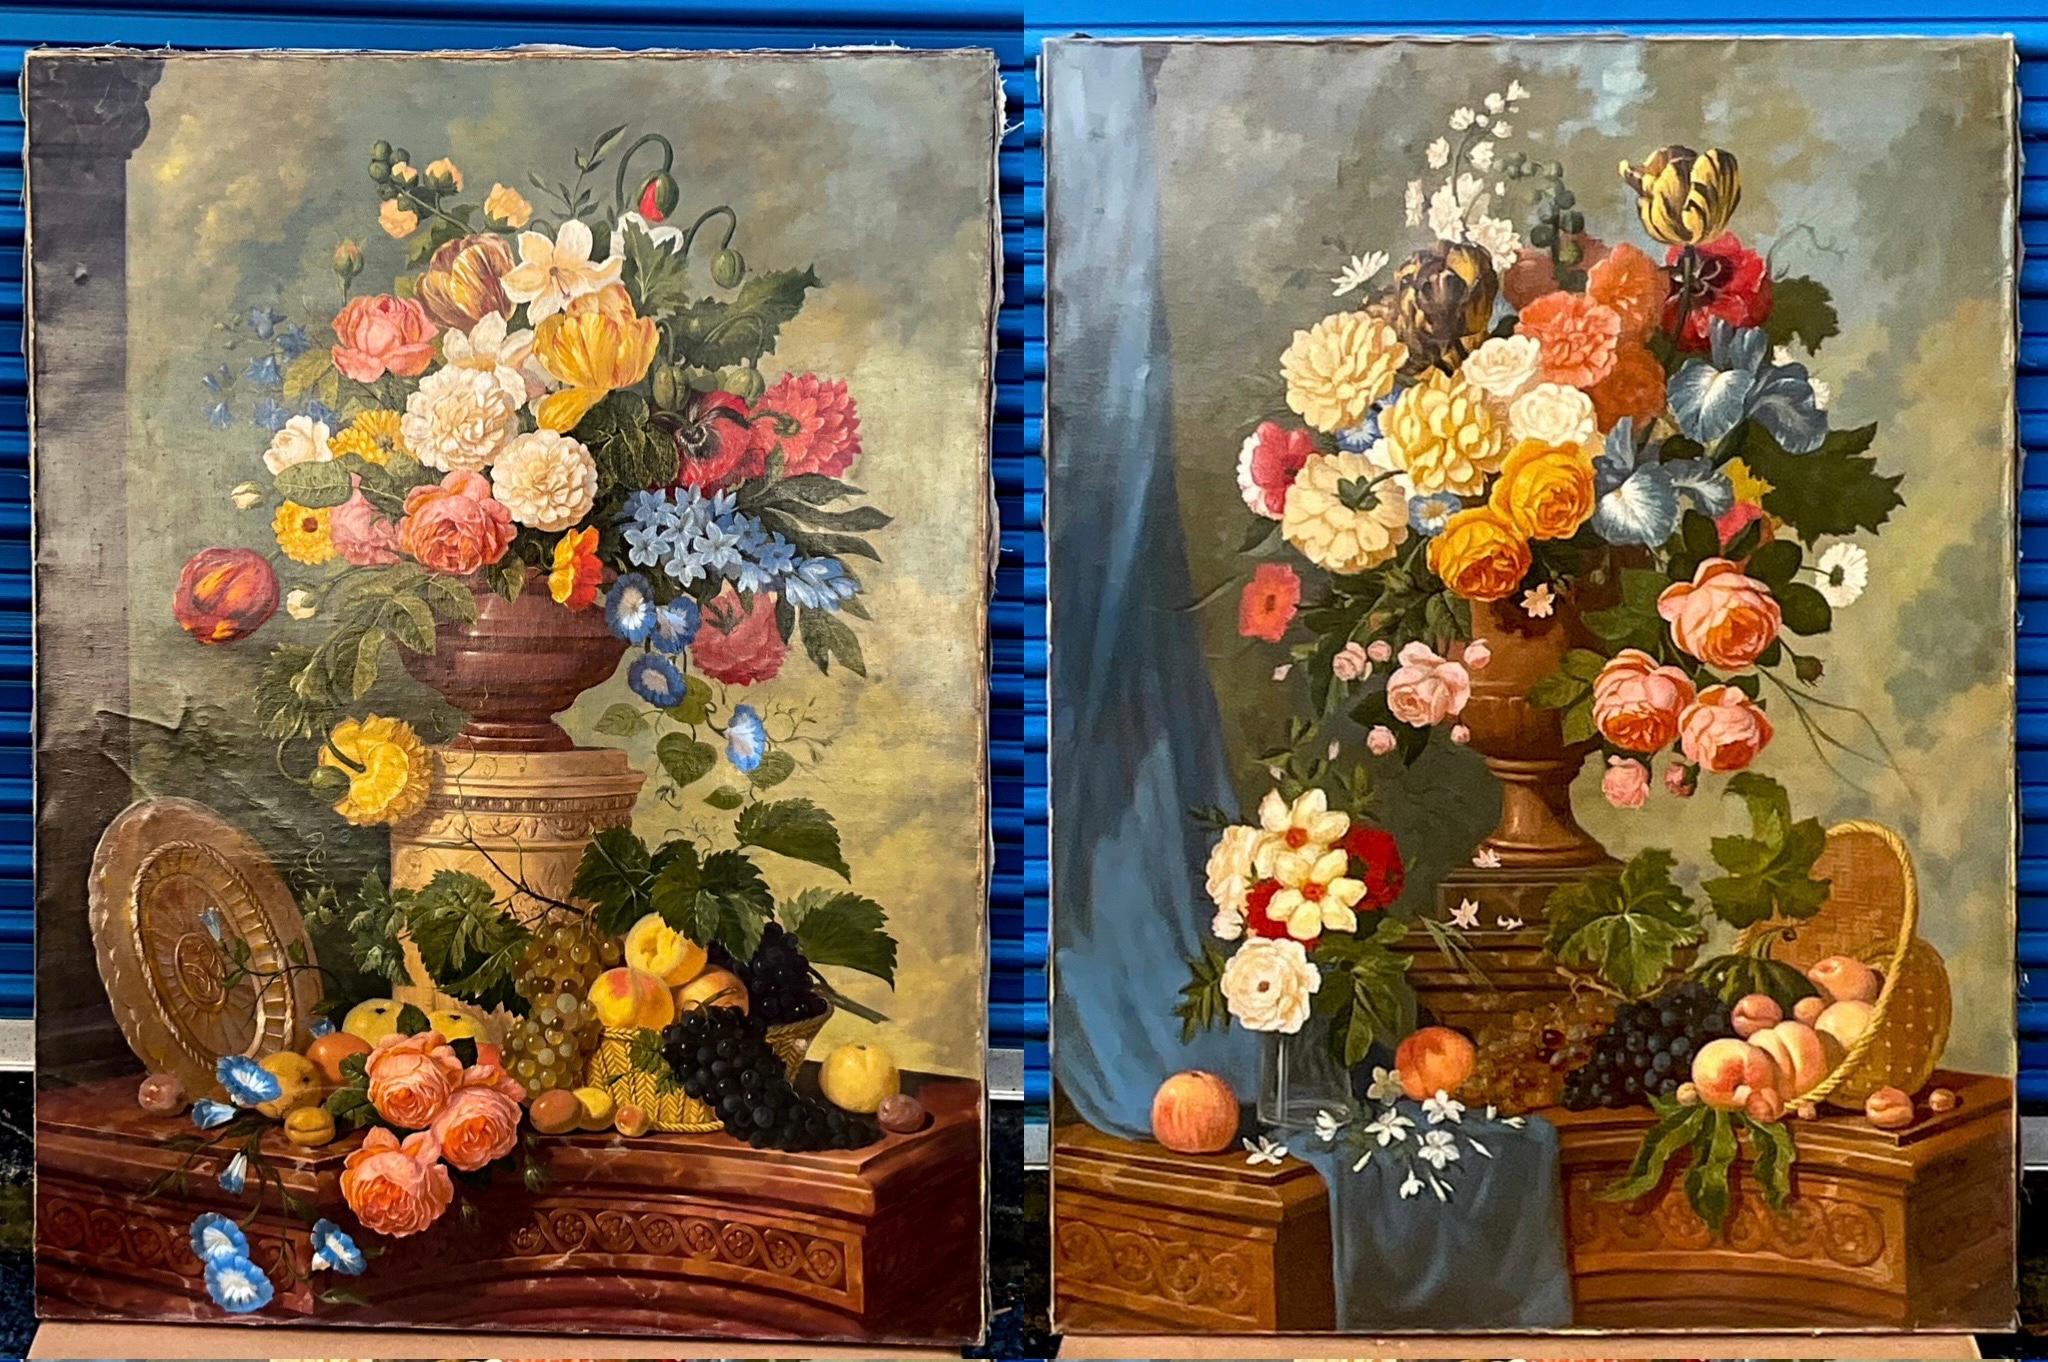 These large scale 19th century French florals are breathtaking. The set complements each other perfectly. Both bouquets have neo-classical elements with the urns and pedestals. The large scale would make a strong visual impact to any setting.

